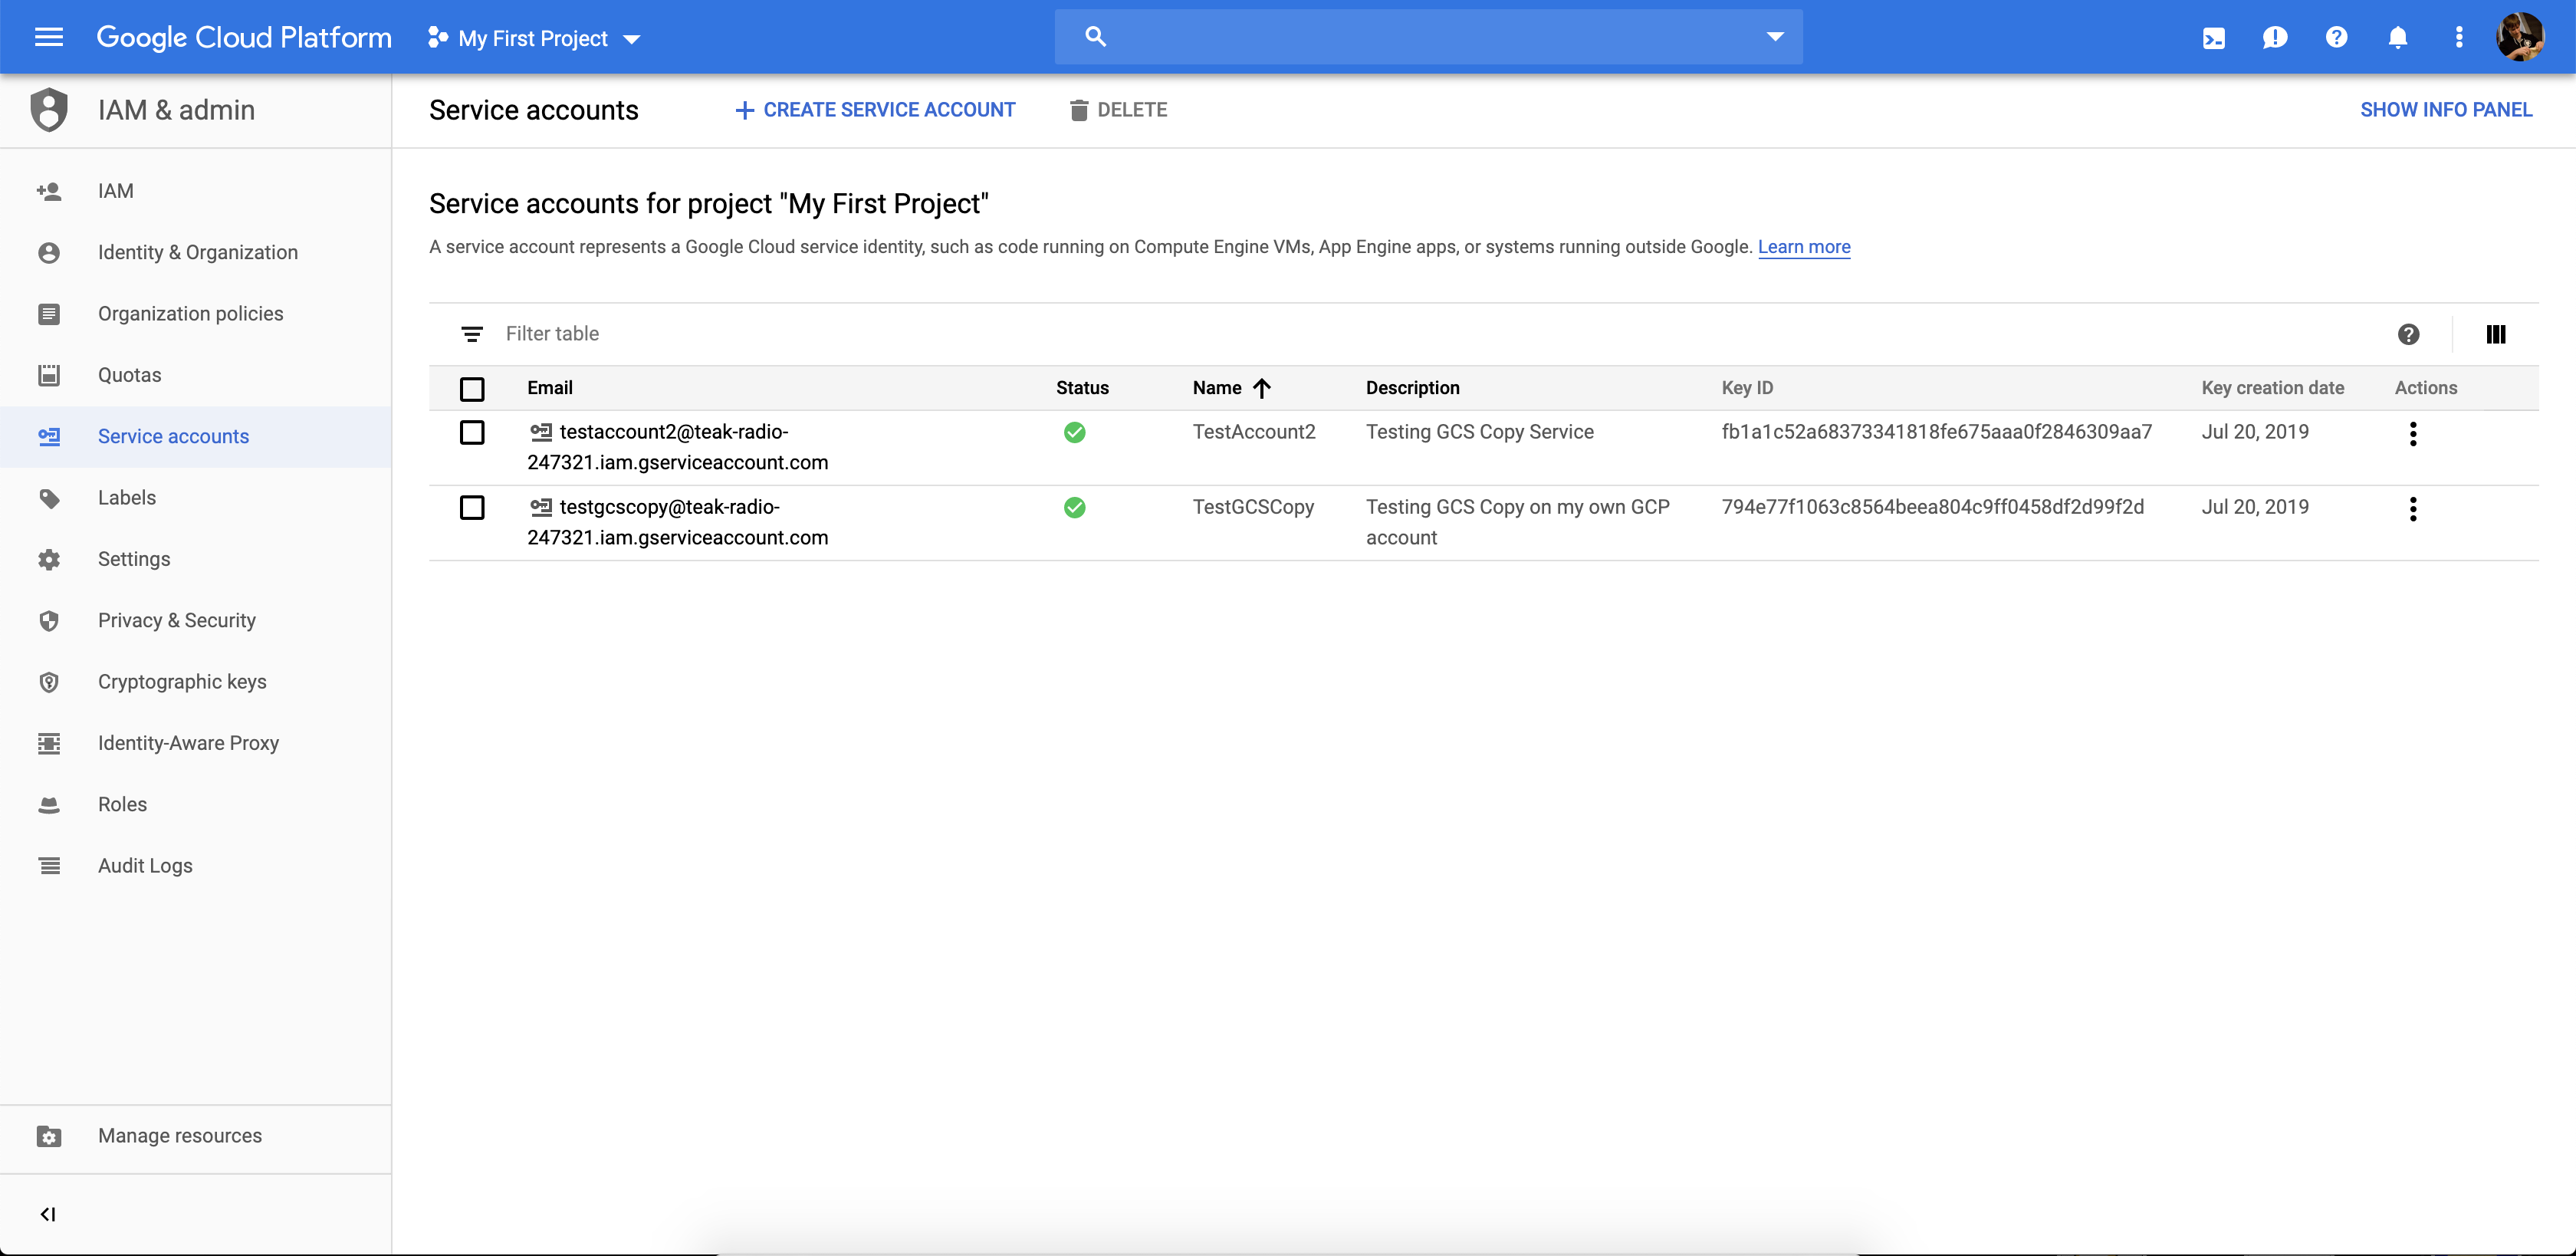 Screenshot of the Service accounts page in Google Cloud.